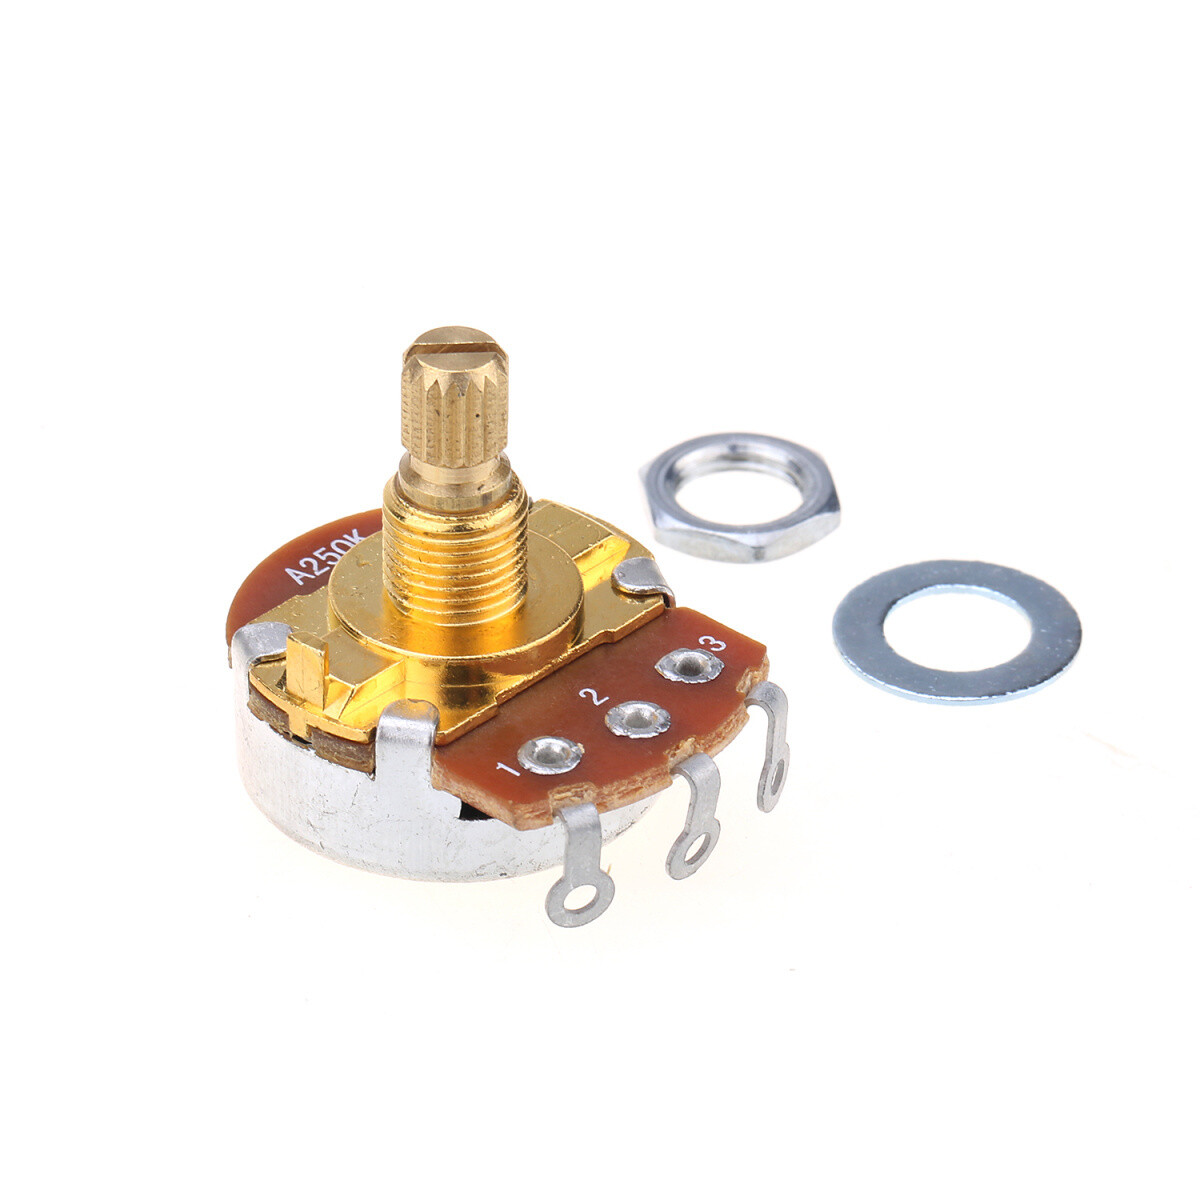 Brio Brass Shaft Full Metric Sized Control Pots A250K Audio Taper Potentiometers for Guitar